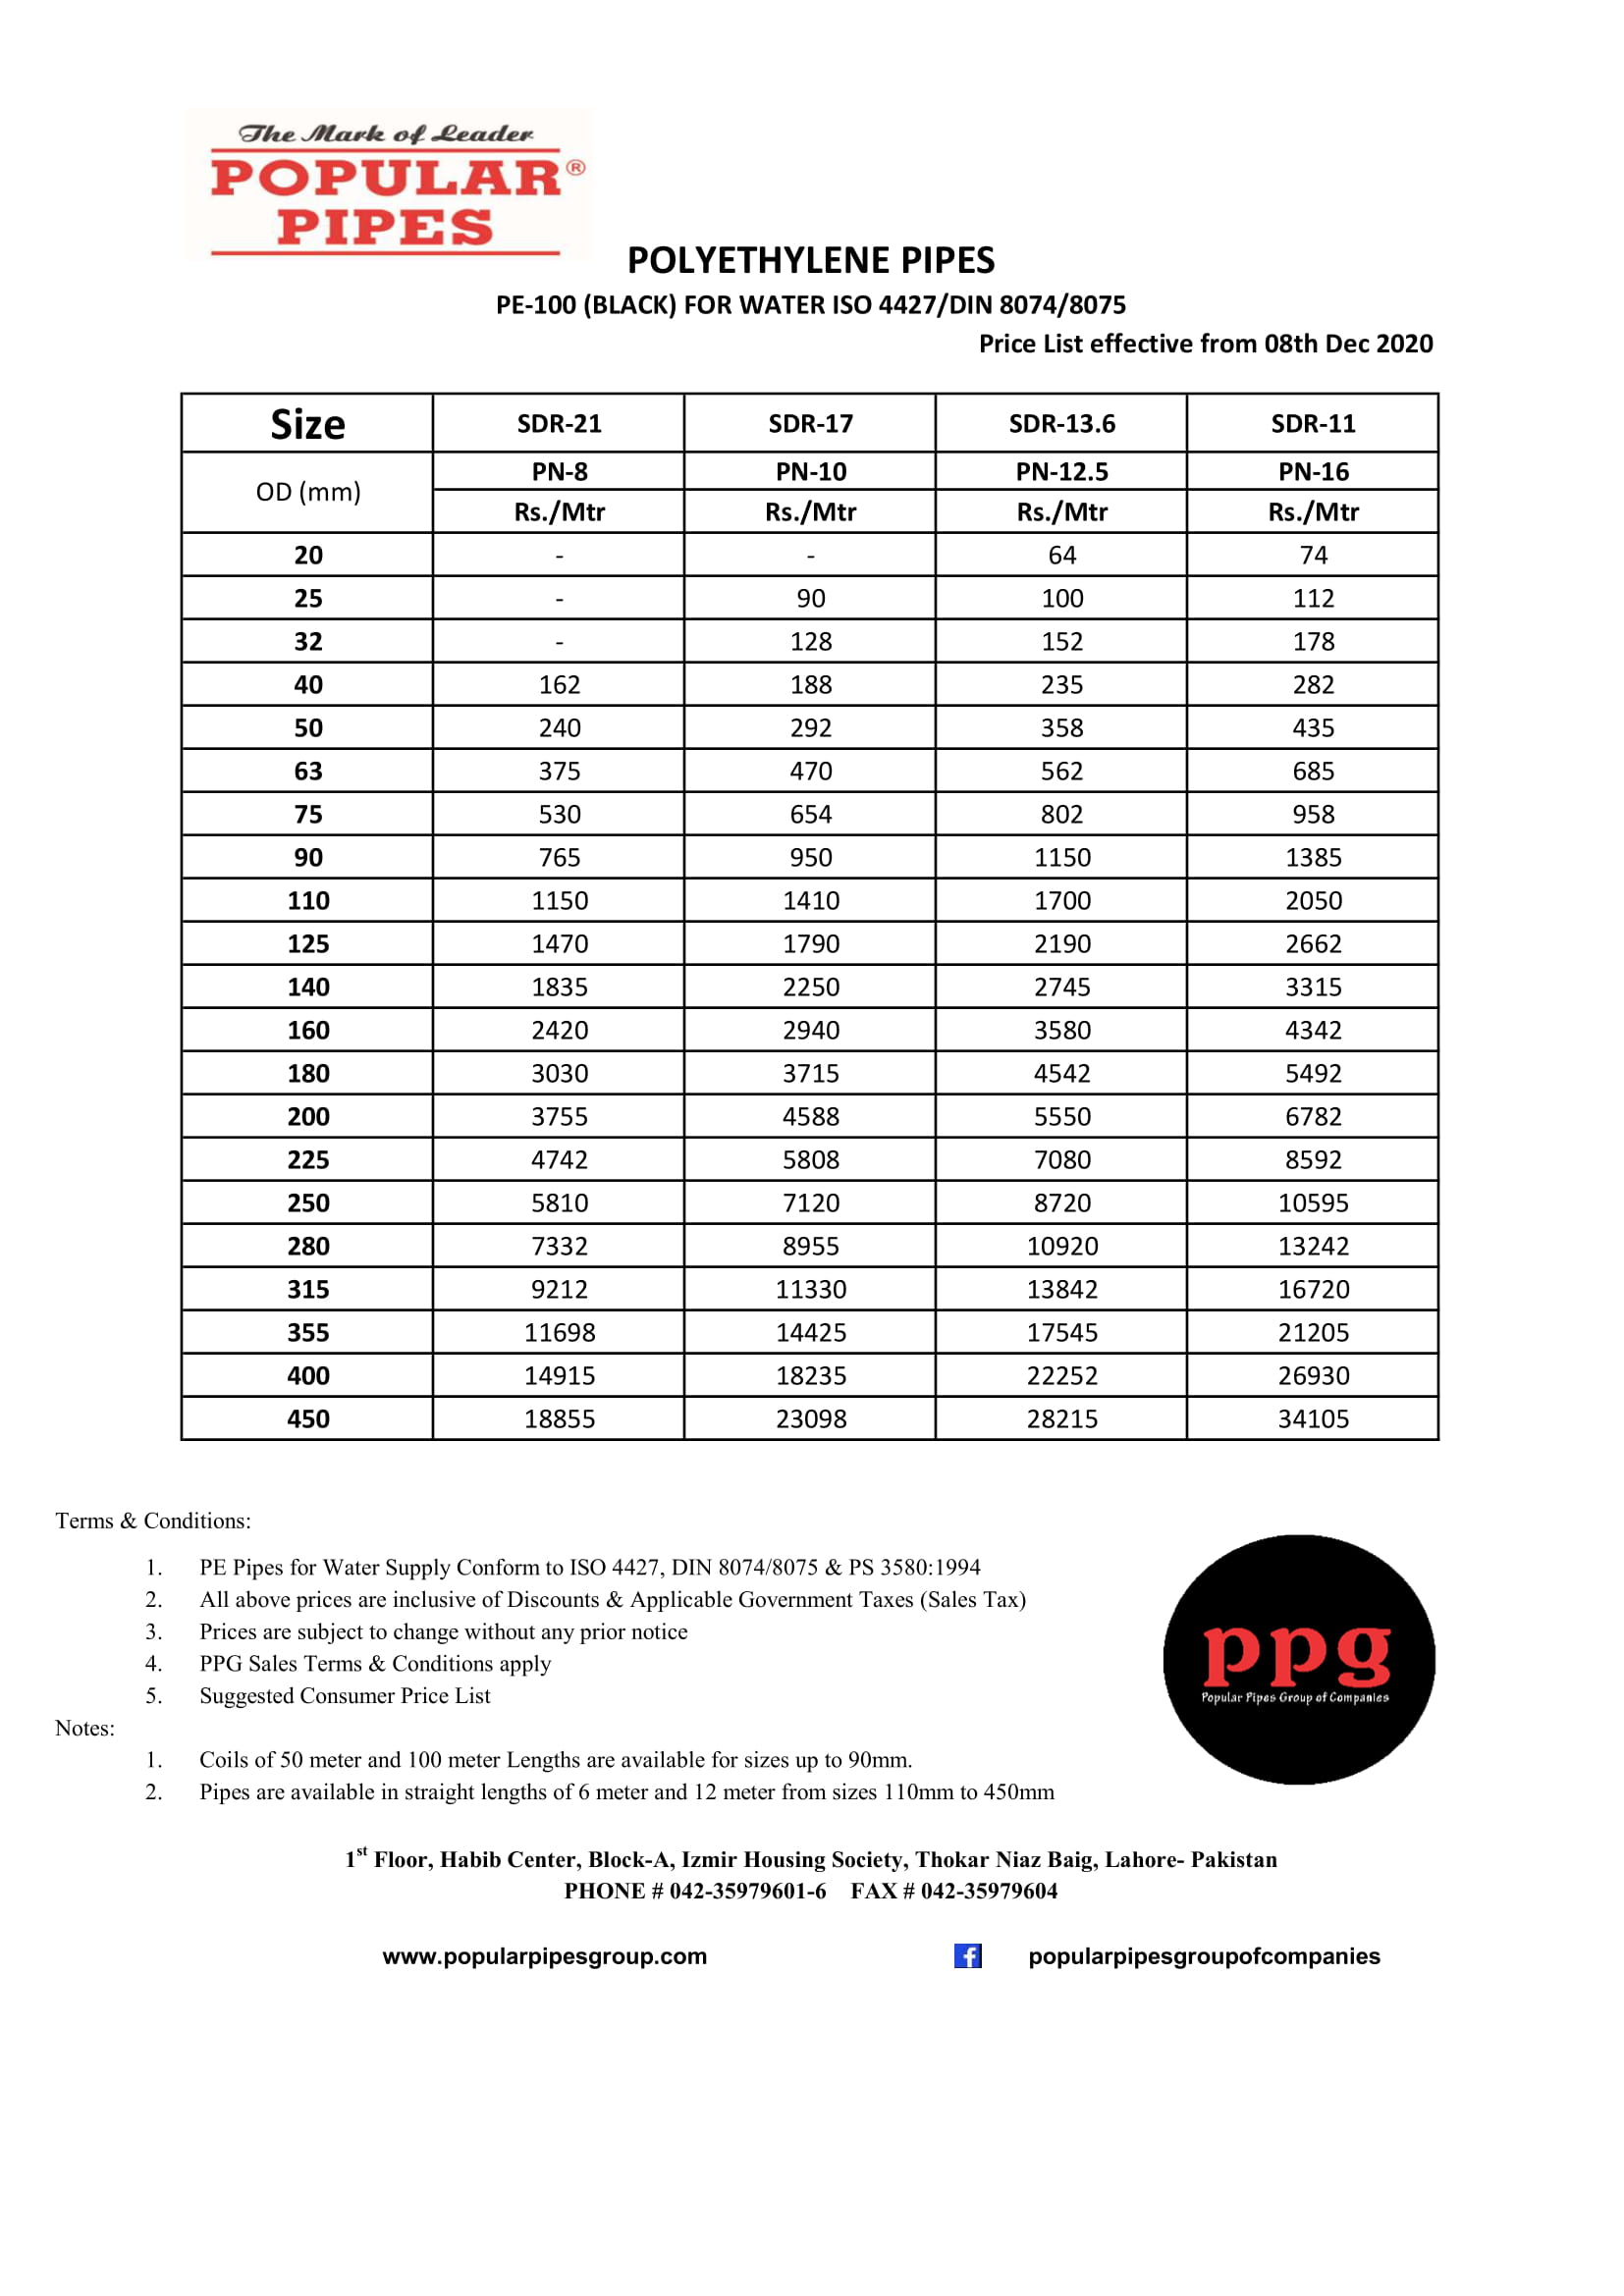 PPG Popular Pipes - hdpe-polyethylene-pipes-pe100-black-for-water - Download Updated Price List 2020